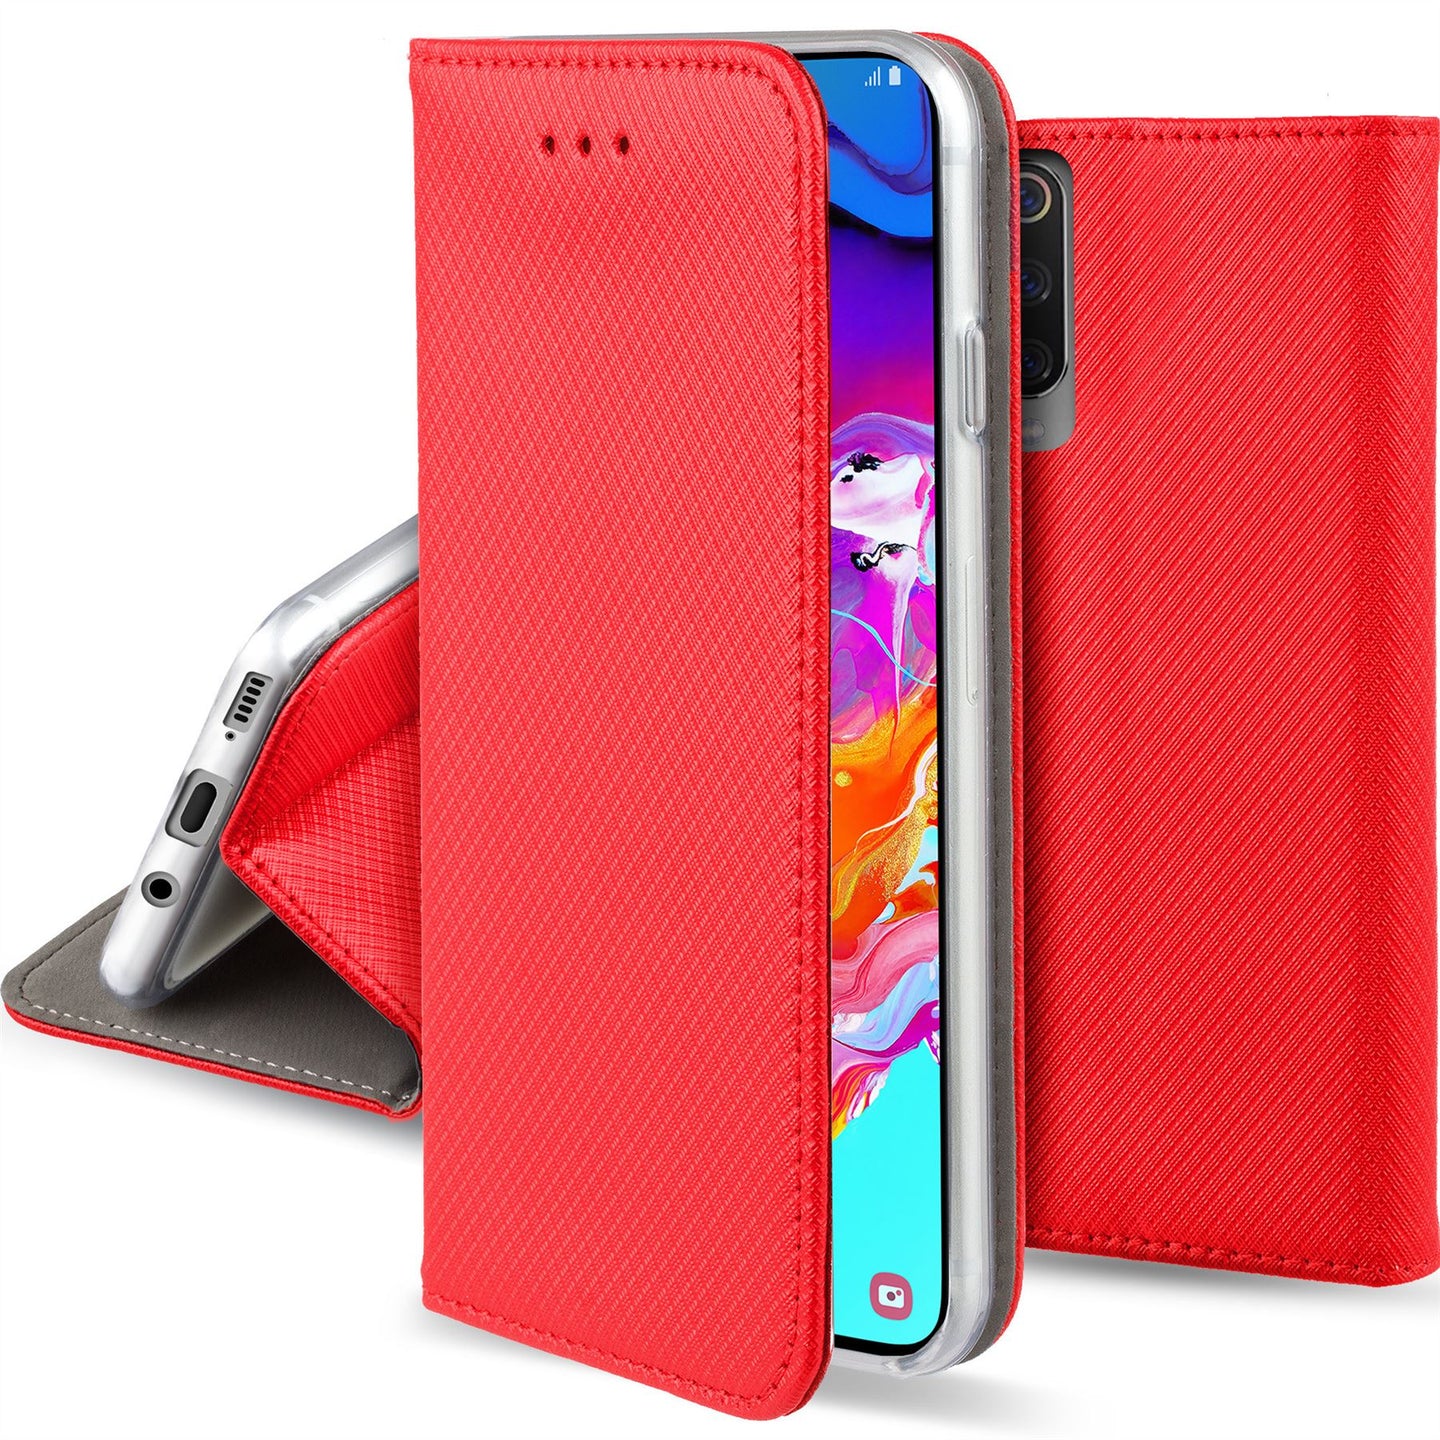 Moozy Case Flip Cover for Samsung A70, Red - Smart Magnetic Flip Case with Card Holder and Stand